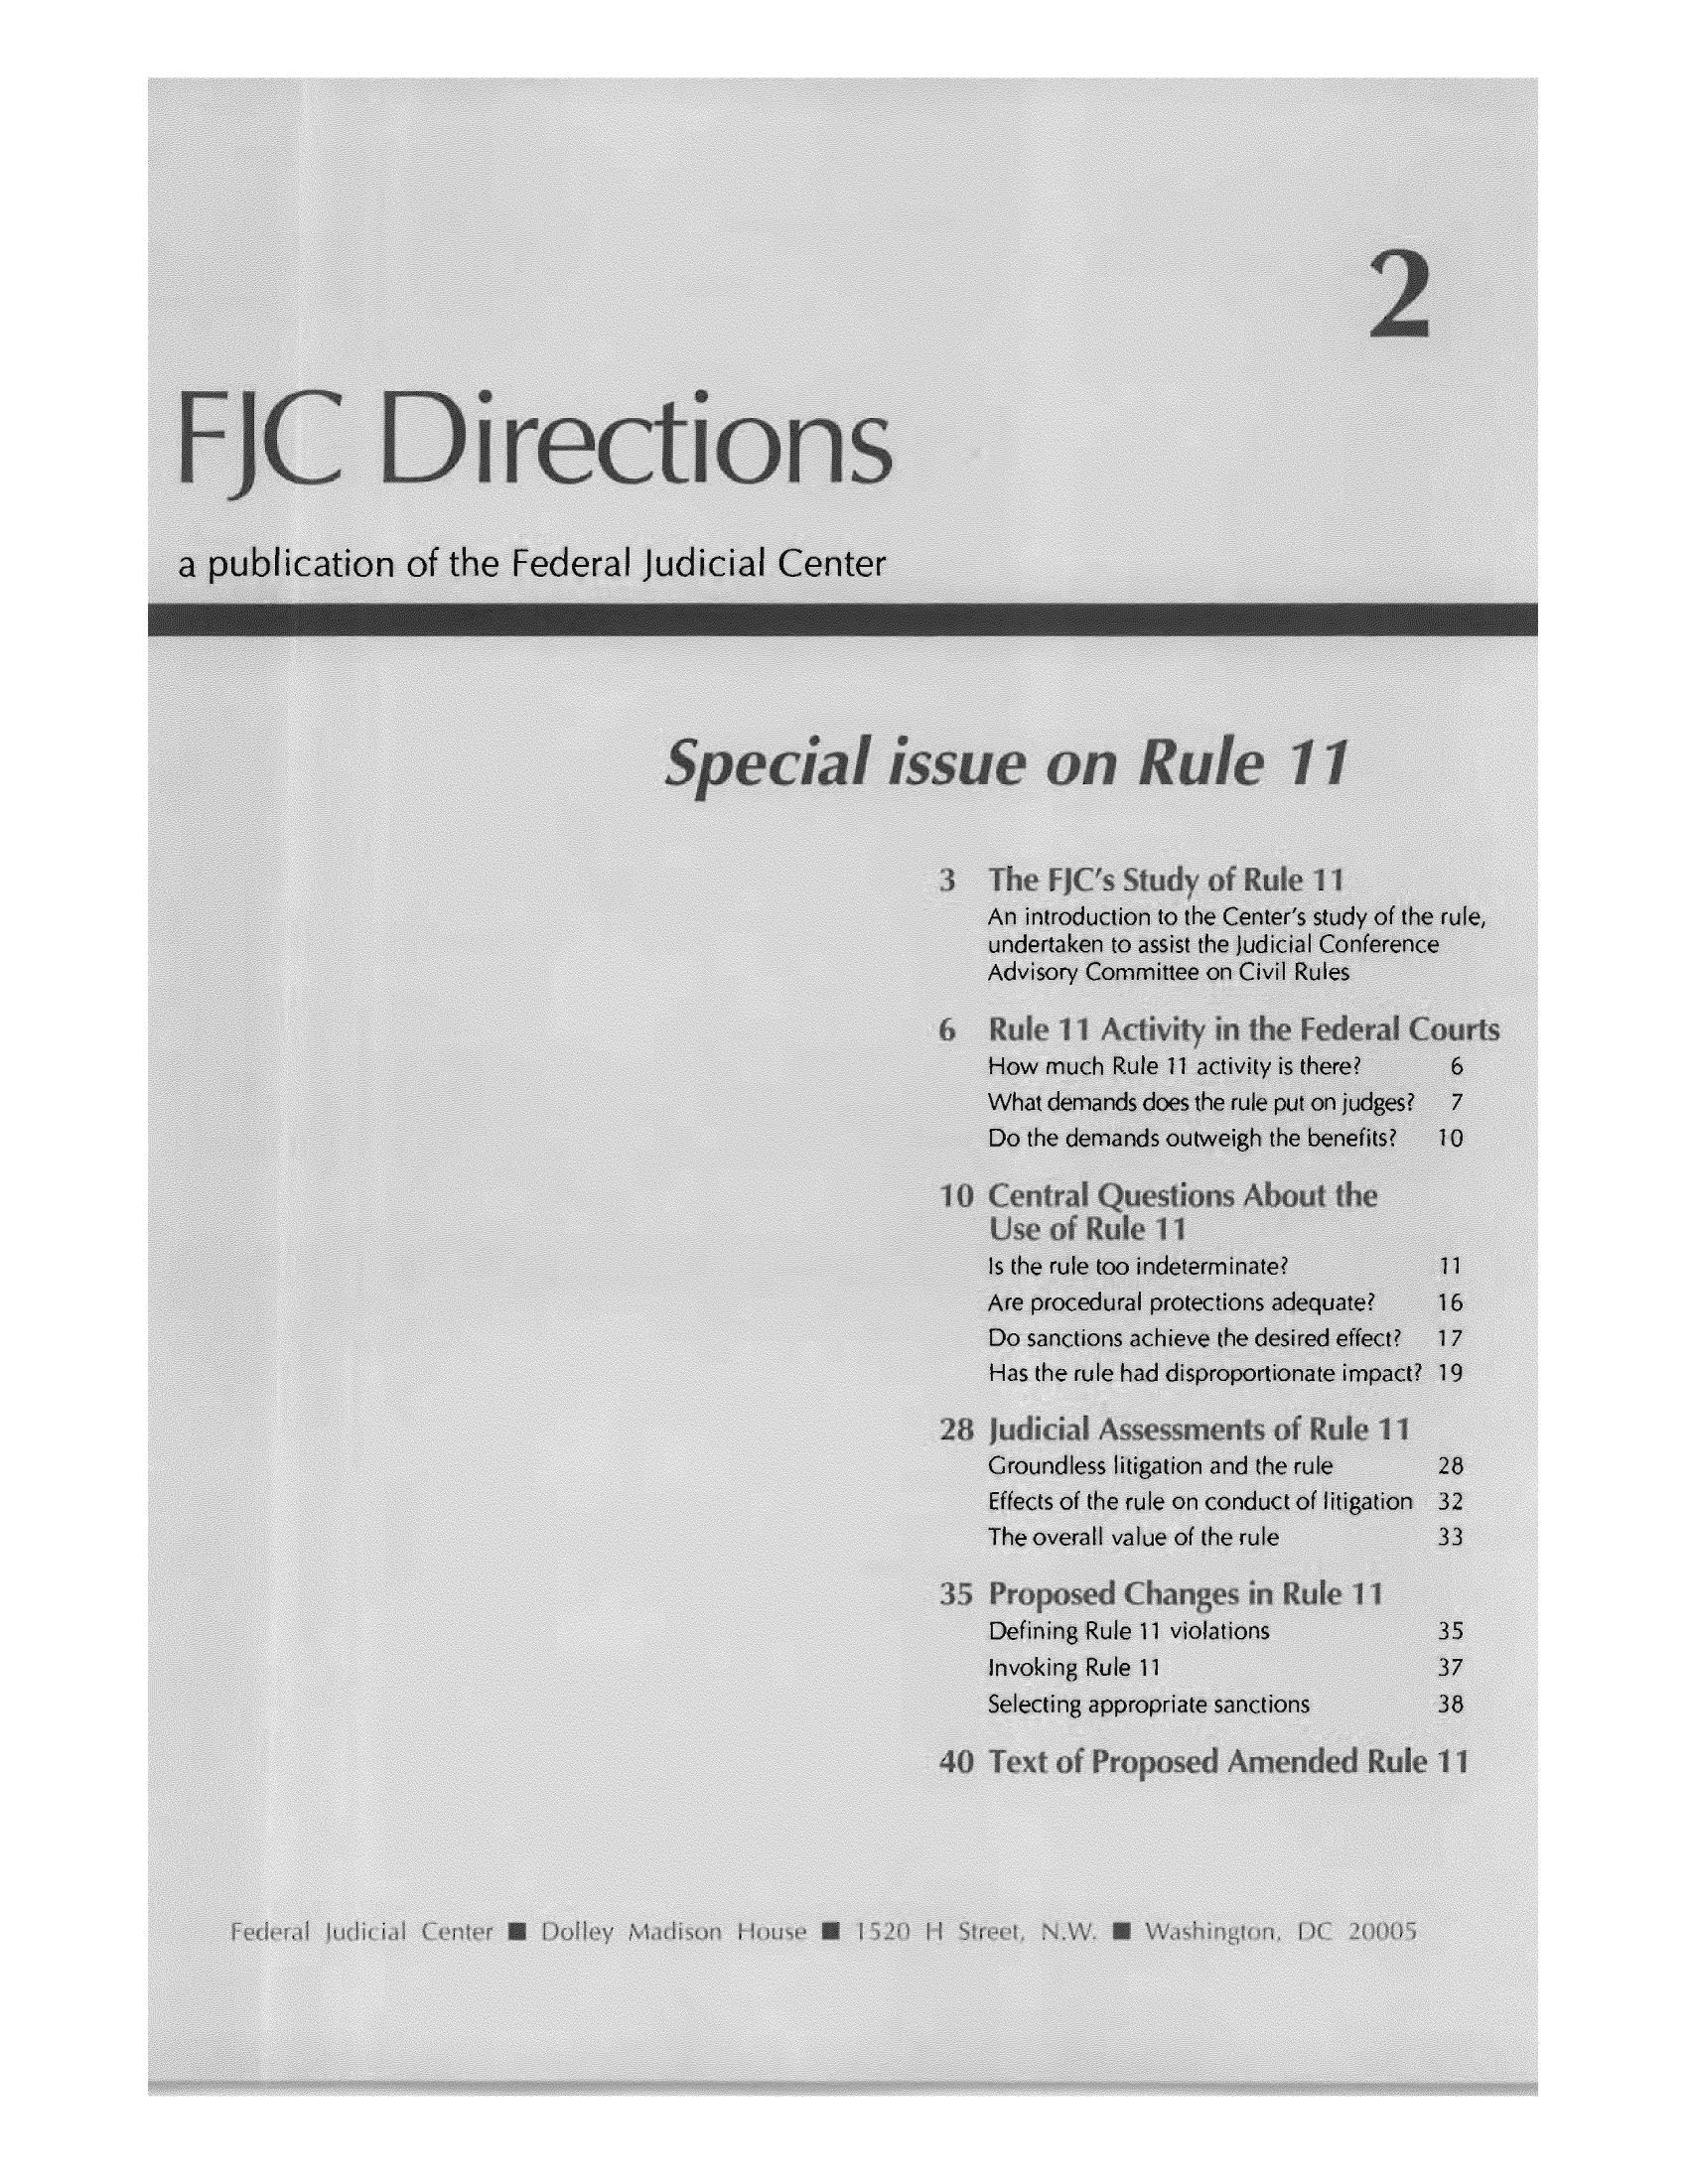 handle is hein.congcourts/fjcdires0001 and id is 1 raw text is: a publication of the Federal Judicial Center
An introduction to the Center's study of the rule
undertaken to assist the Judicial Conference
Advisory Committee on Civil Rules
How much Rule 11 activity is there?  6
What demands does the rule put on judges?  7
Do the demands outweigh the benefits?  10
Is the rule too indeterminate?     11
Are procedural protections adequate?  16
Do sanctions achieve the desired effect?  17
Has the rule had disproportionate impact? 19
Groundless litigation and the rule  28
Effects of the rule on conduct of litigation 32
The overall value of the rule      33
Defining Rule 11 violations        35
Invoking Rule 11                   37
Selecting appropriate sanctions    38


